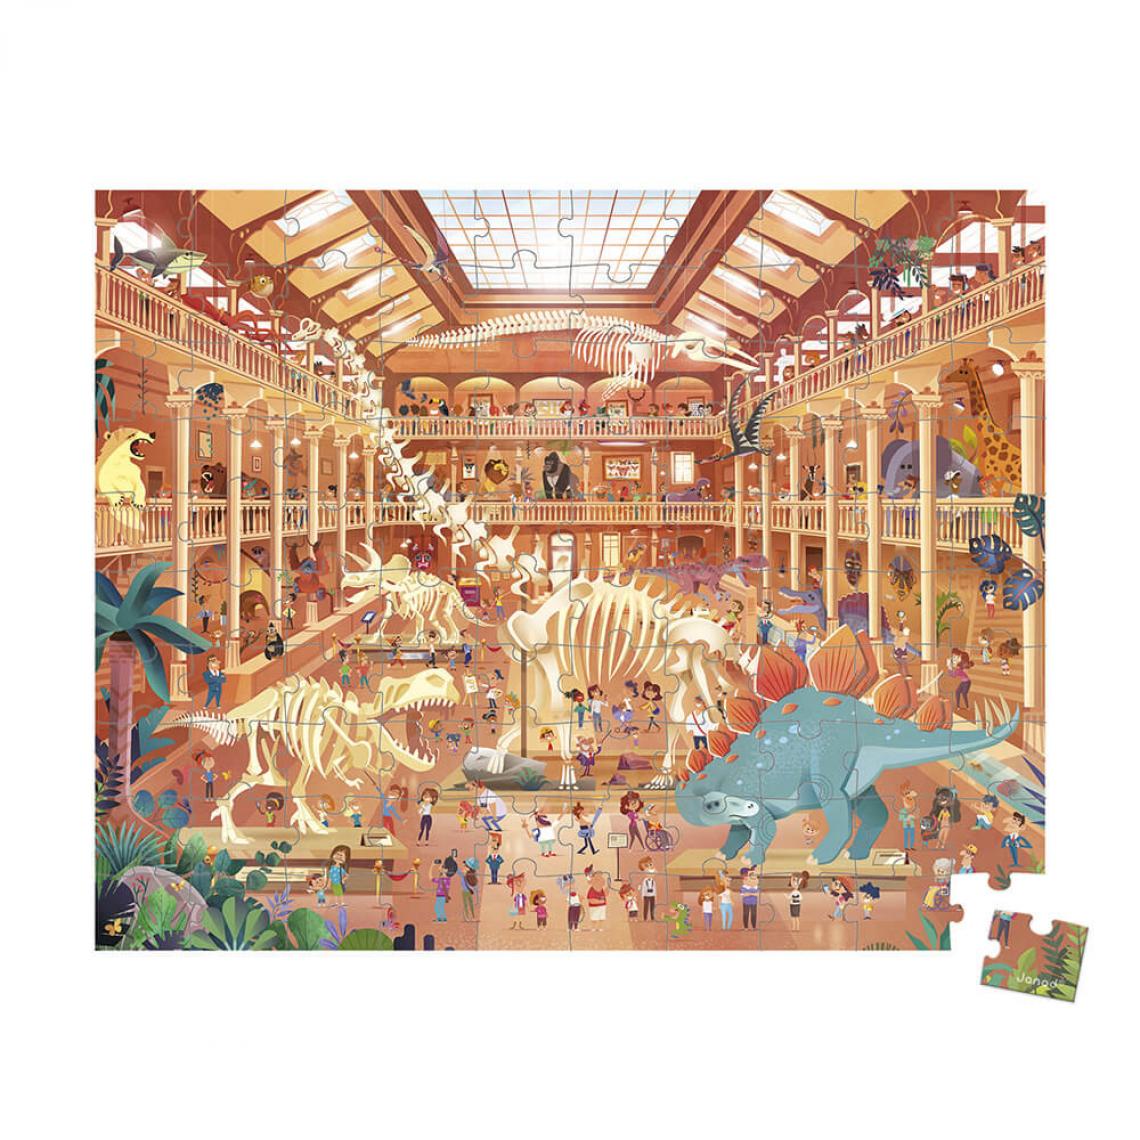 Juratoys-Janod - Puzzle musee histoire naturelle 100 pieces - Animaux